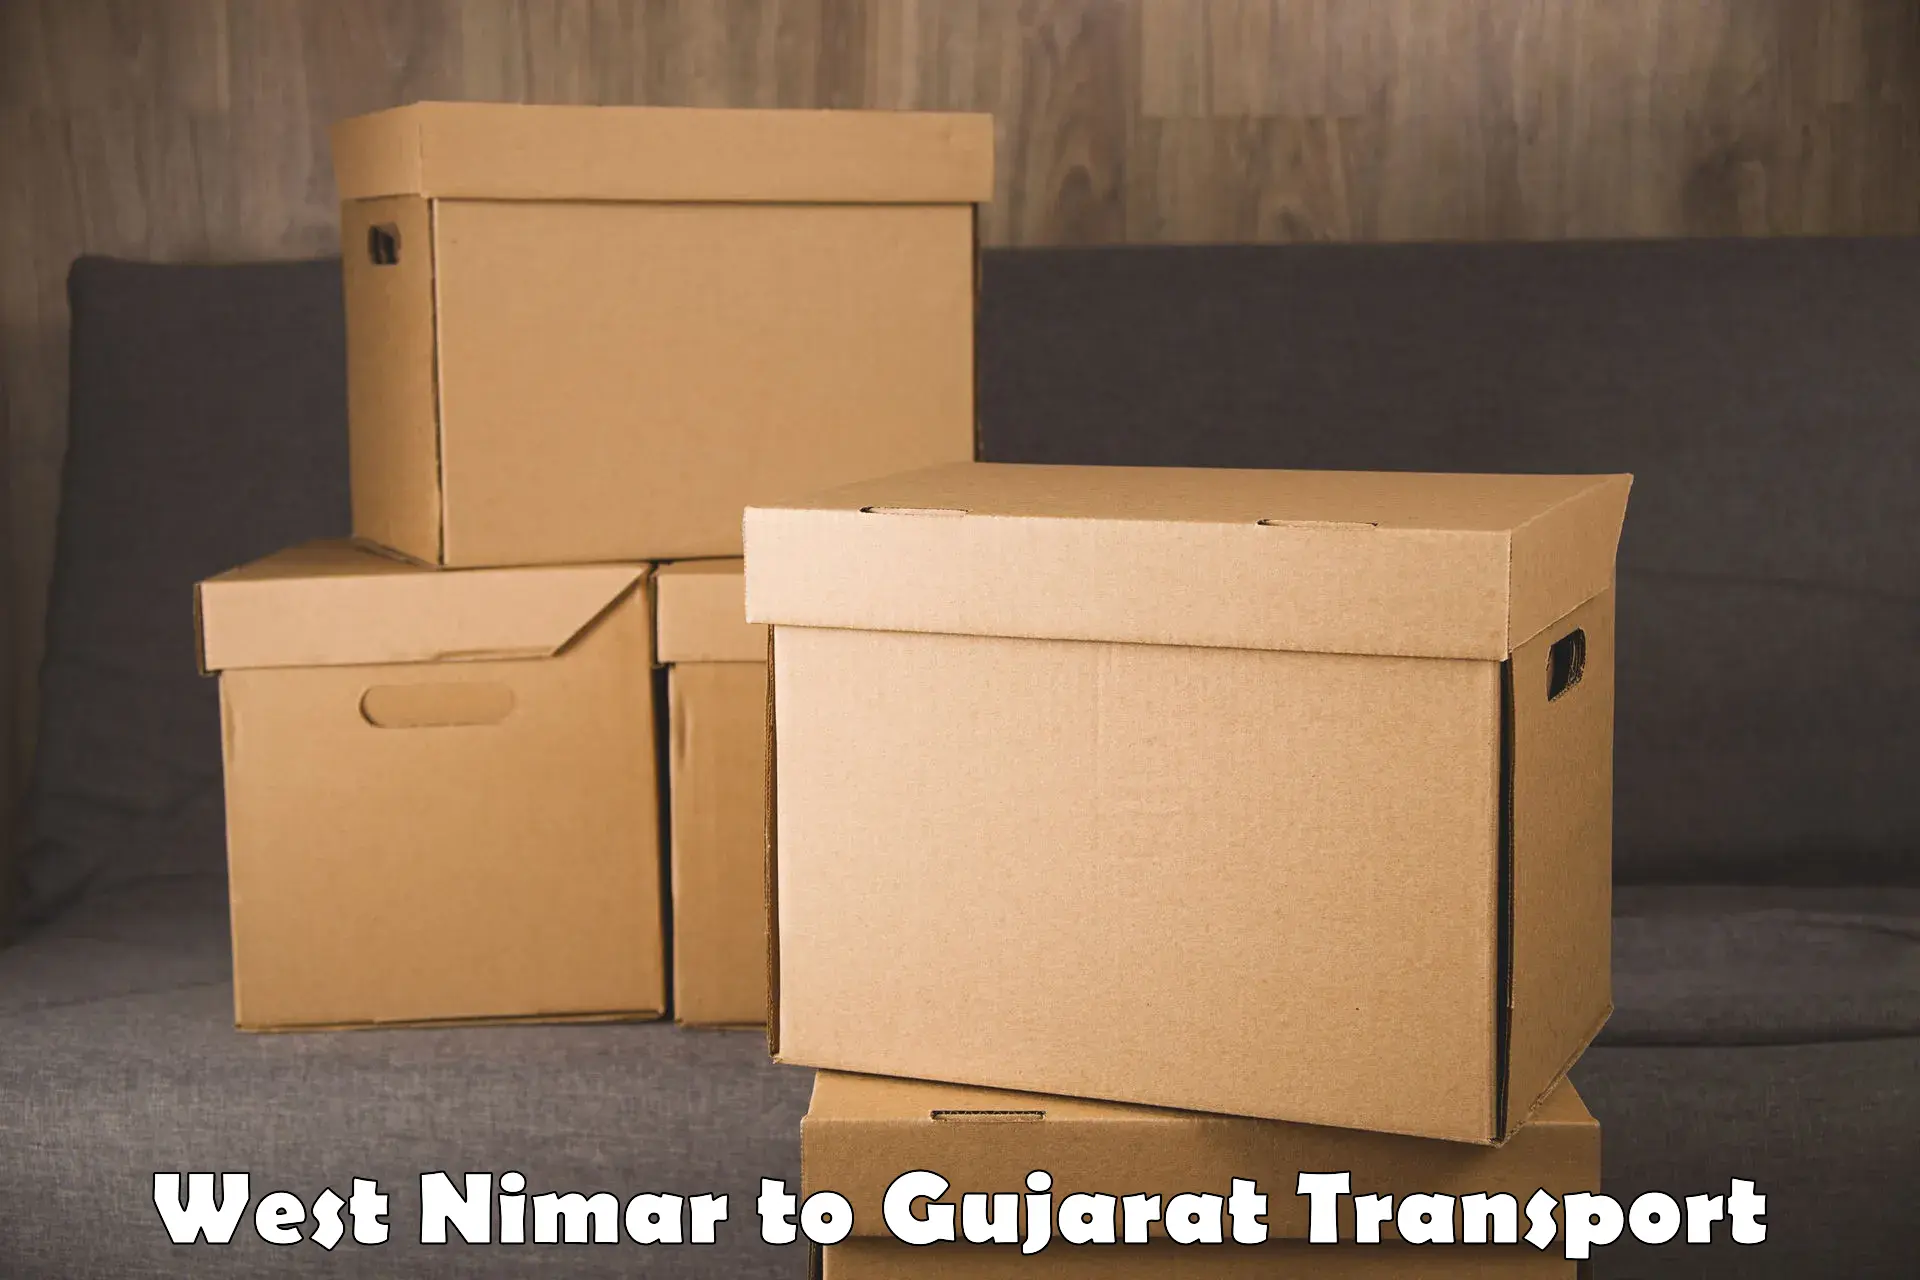 Daily transport service West Nimar to Veraval